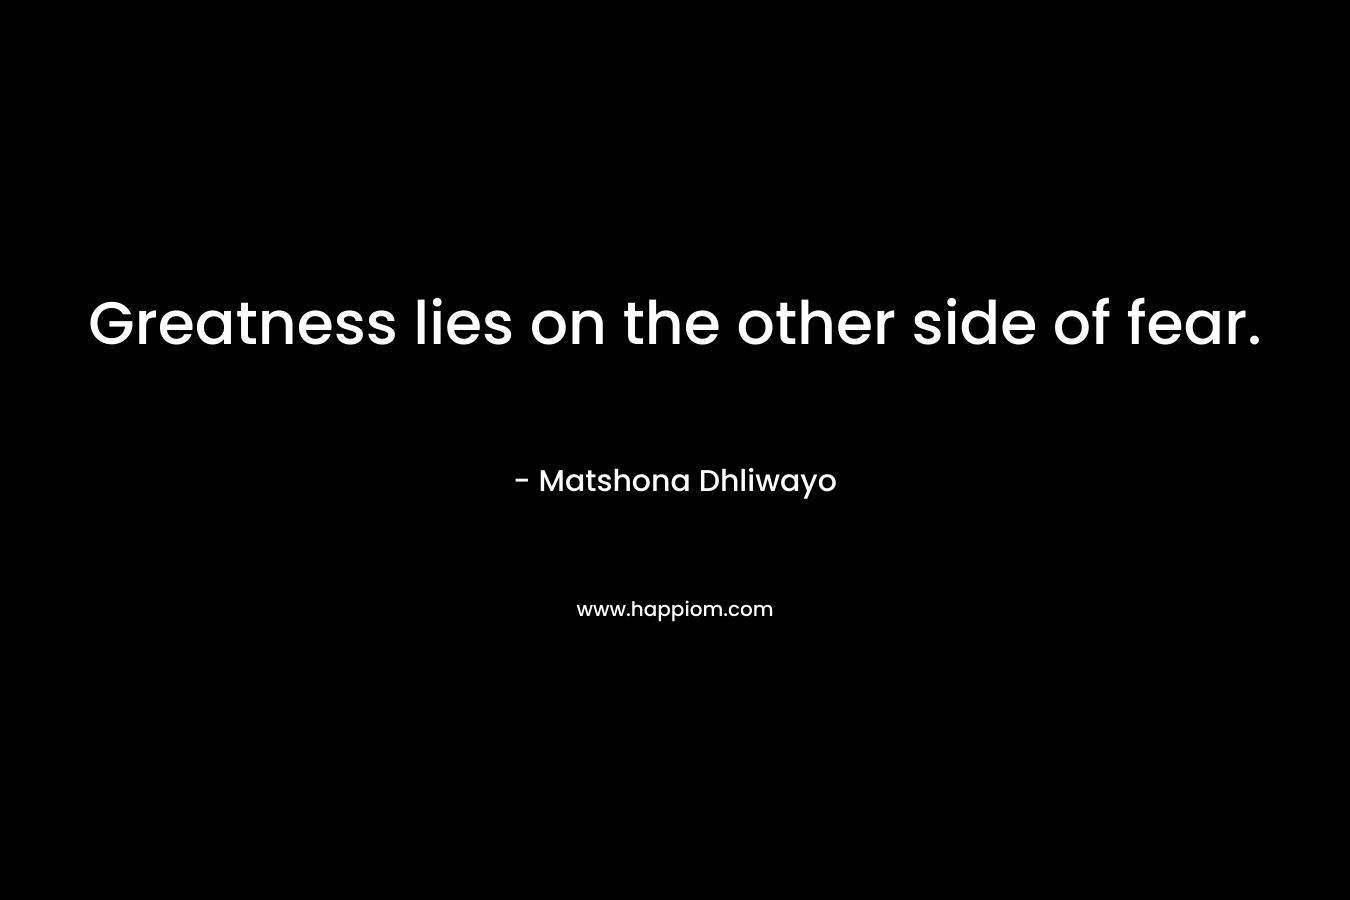 Greatness lies on the other side of fear.